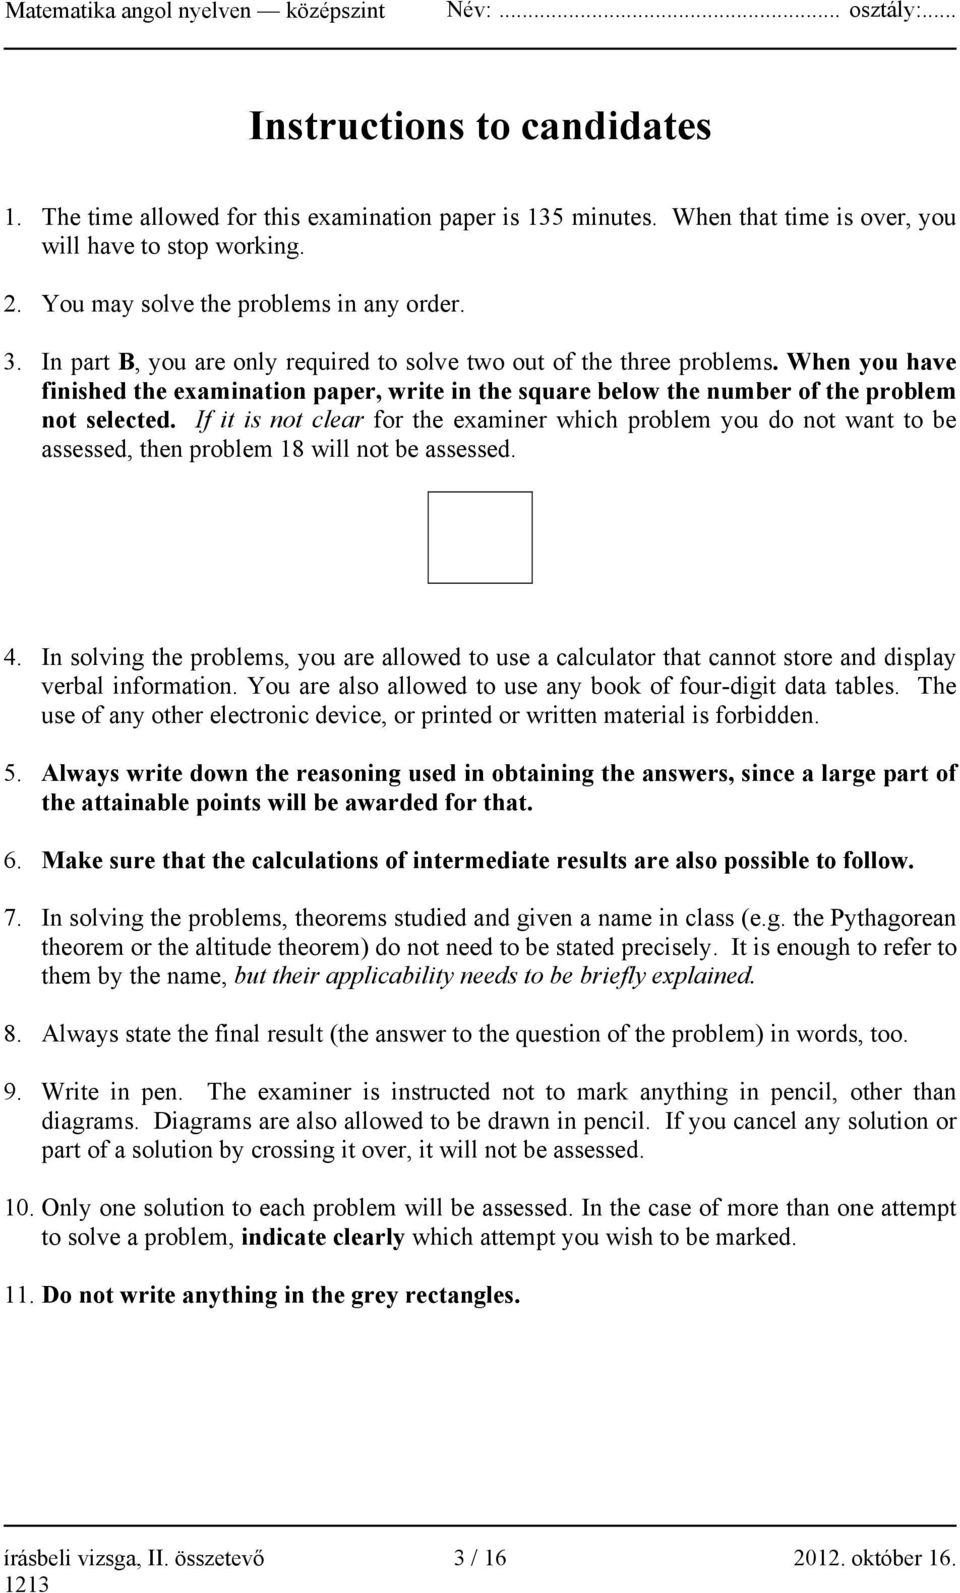 If it is not clear for the examiner which problem you do not want to be assessed, then problem 18 will not be assessed. 4.